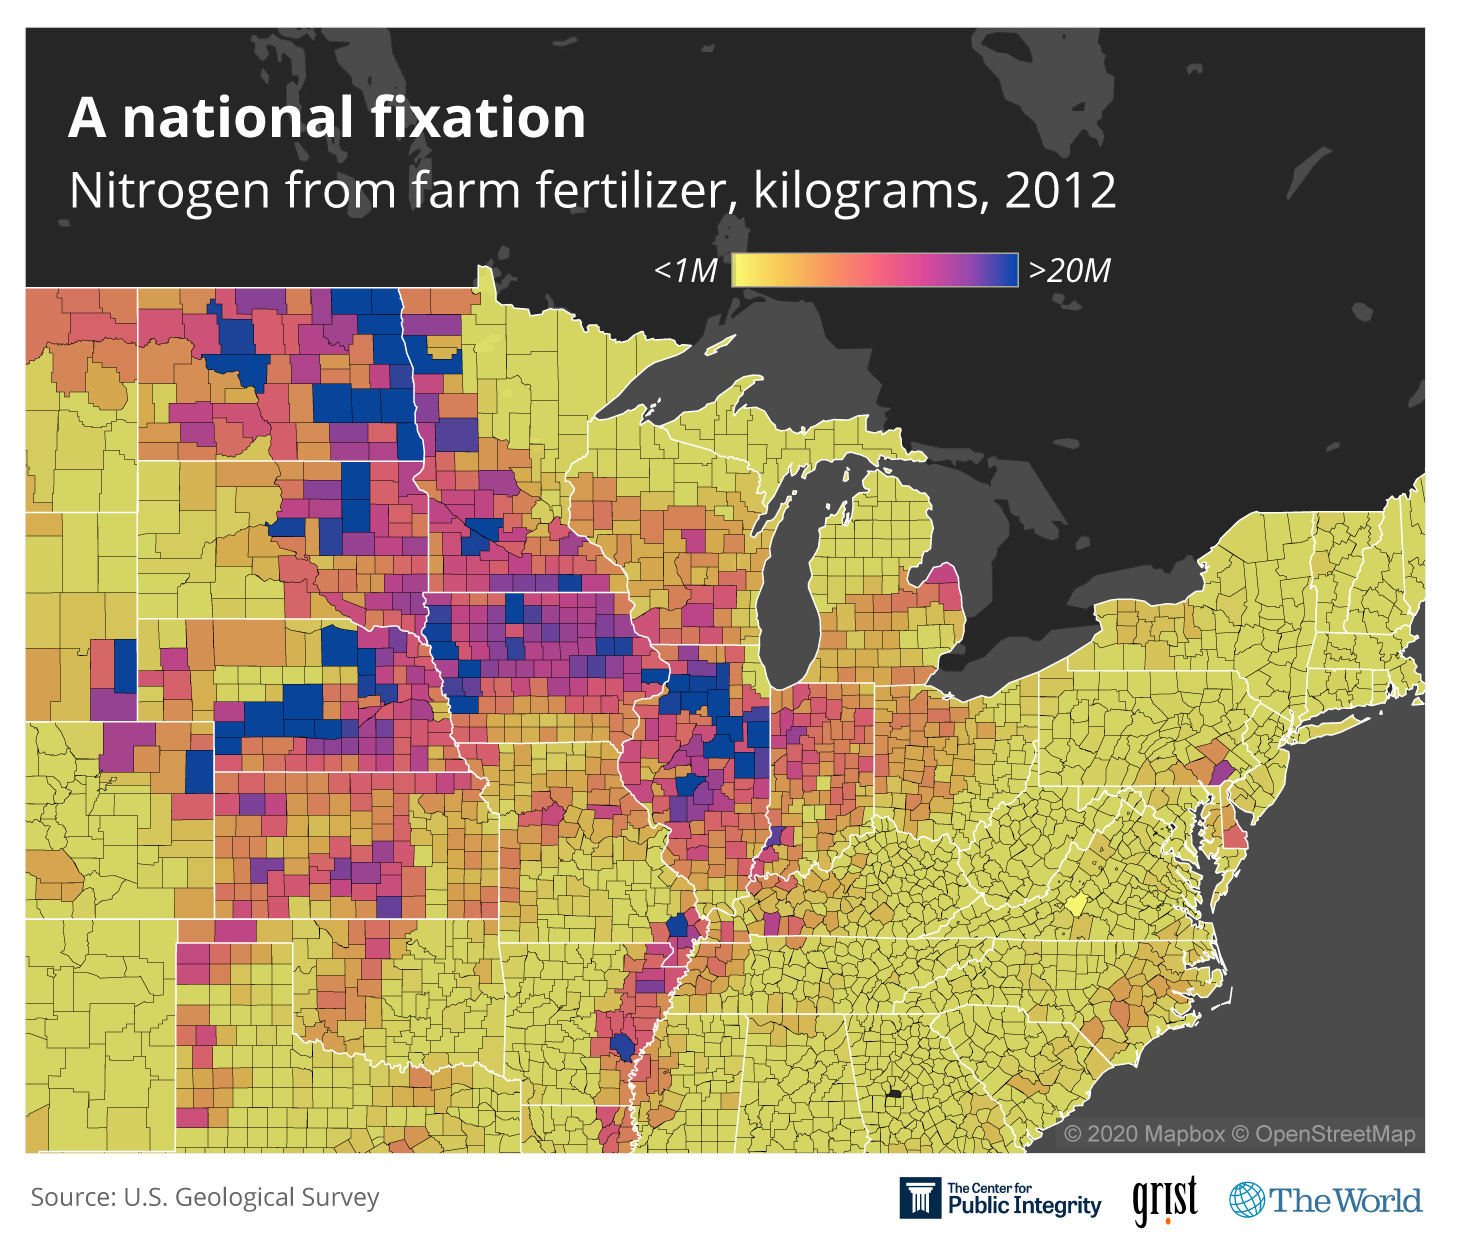 A map of the Midwest showing nitrogen from farm fertilizer in kilograms from 2012. High concentrations appear along the Mississippi River.